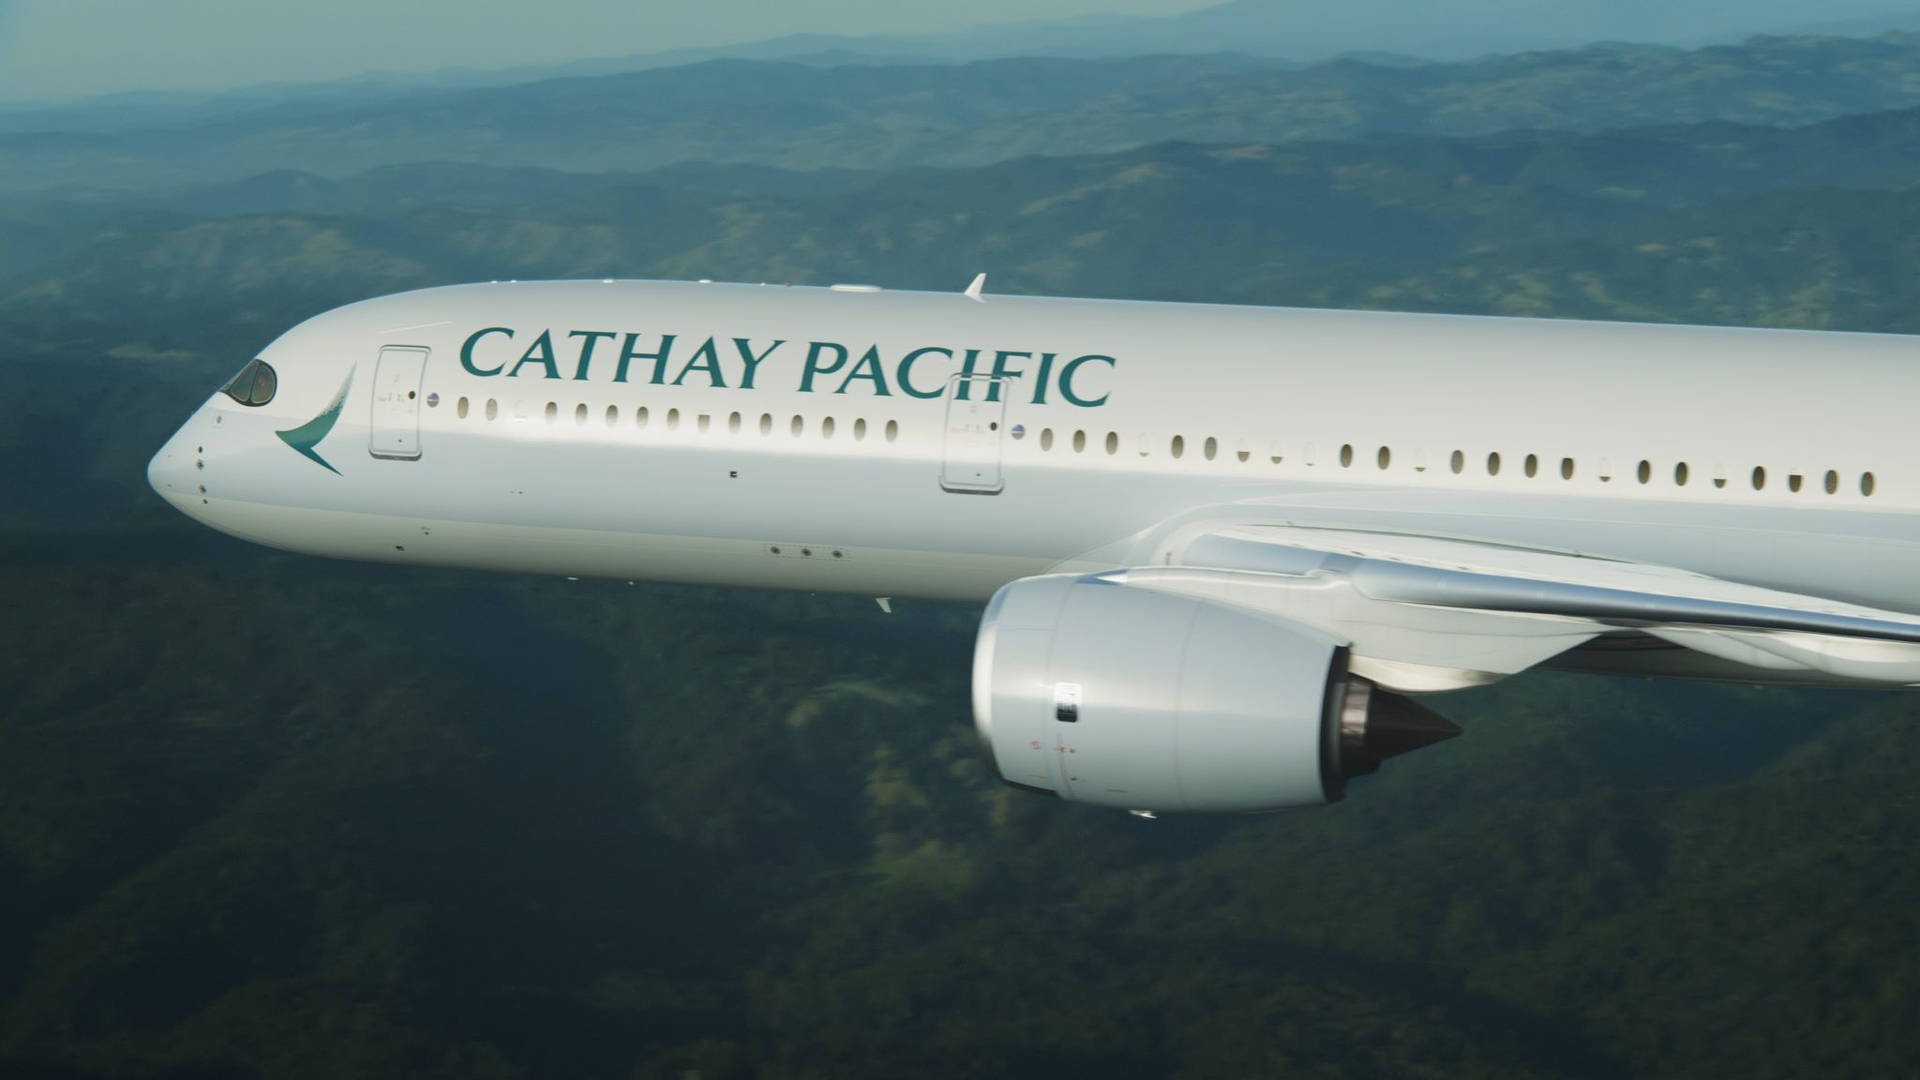 Cathay Pacific Mountain View Wallpaper